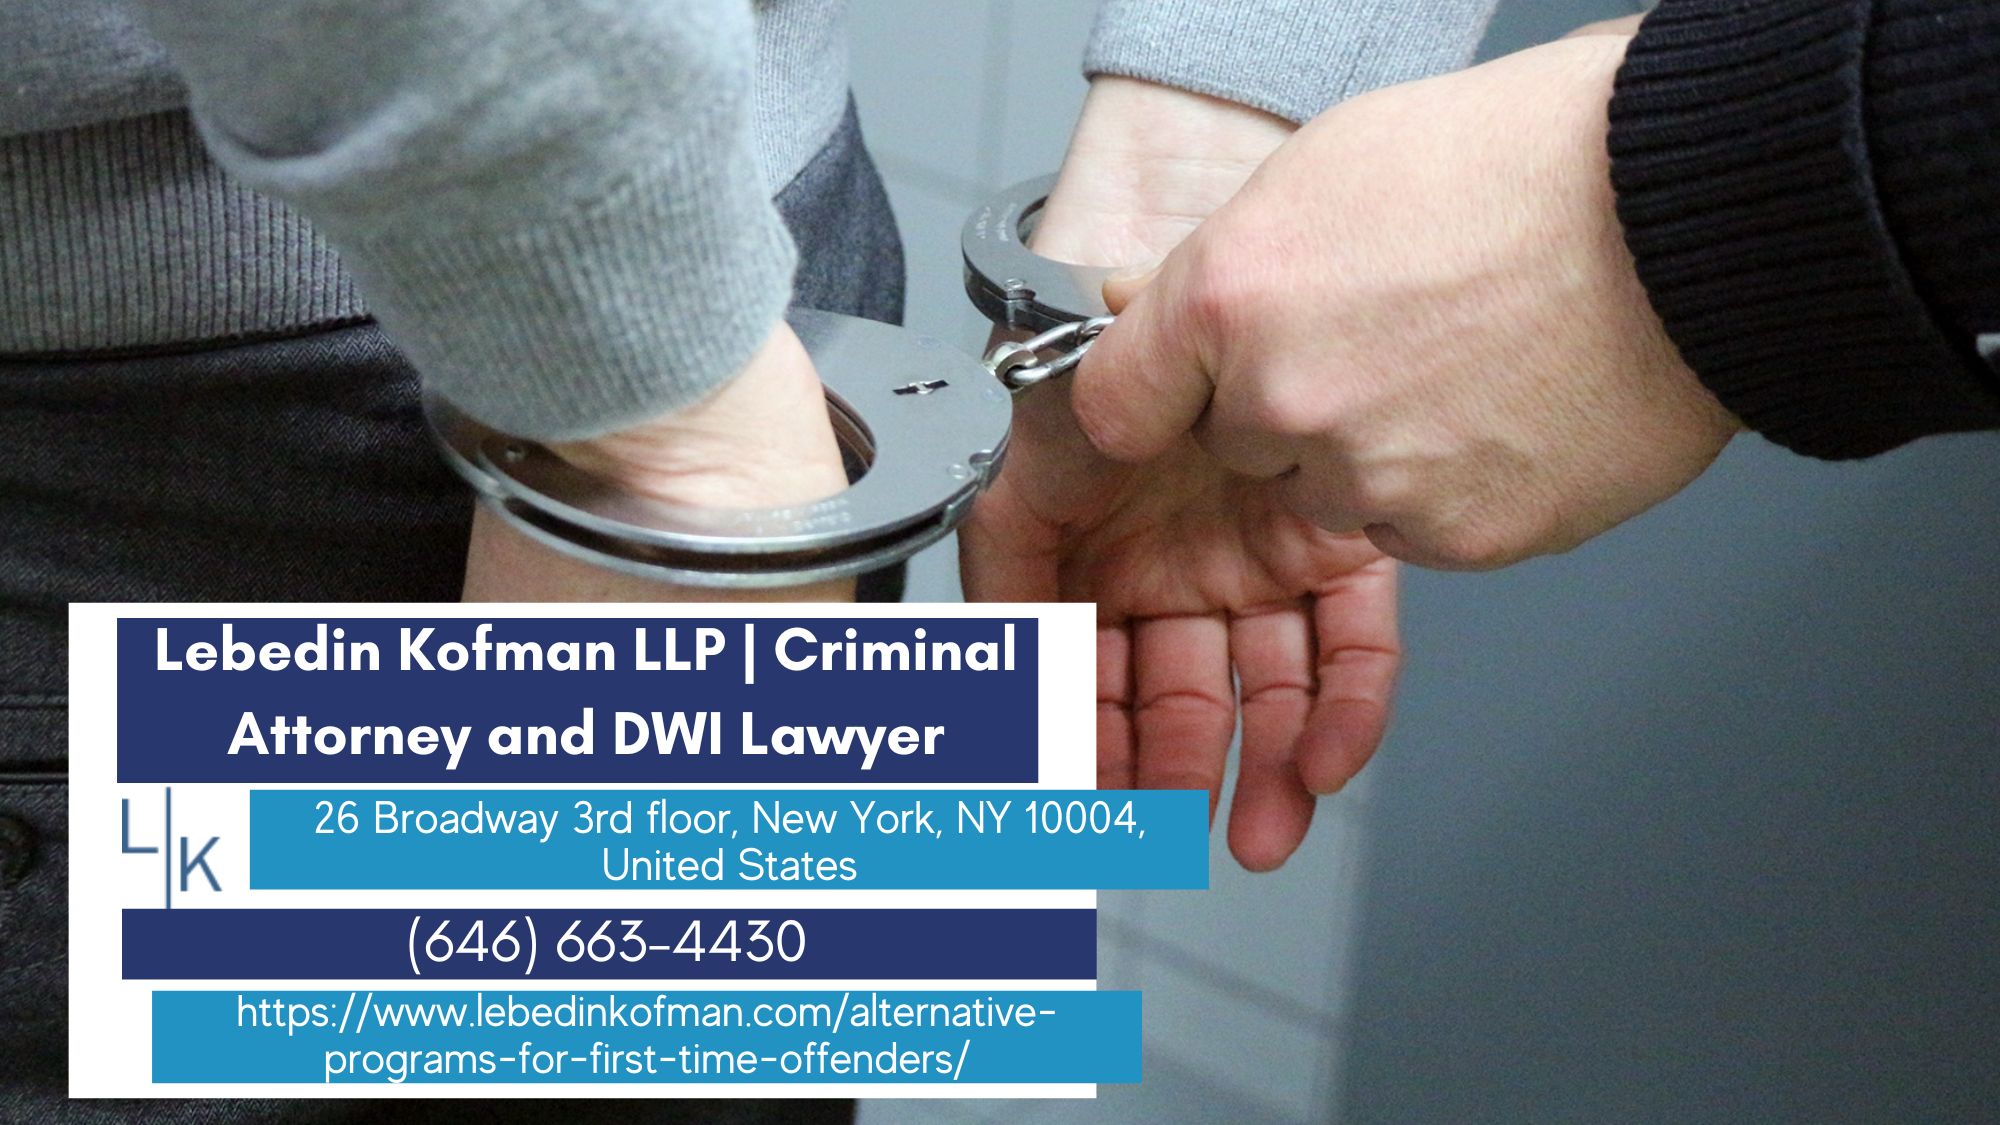 Manhattan DWI Lawyer Russ Kofman Releases Article on Alternative Programs for First-Time Offenders